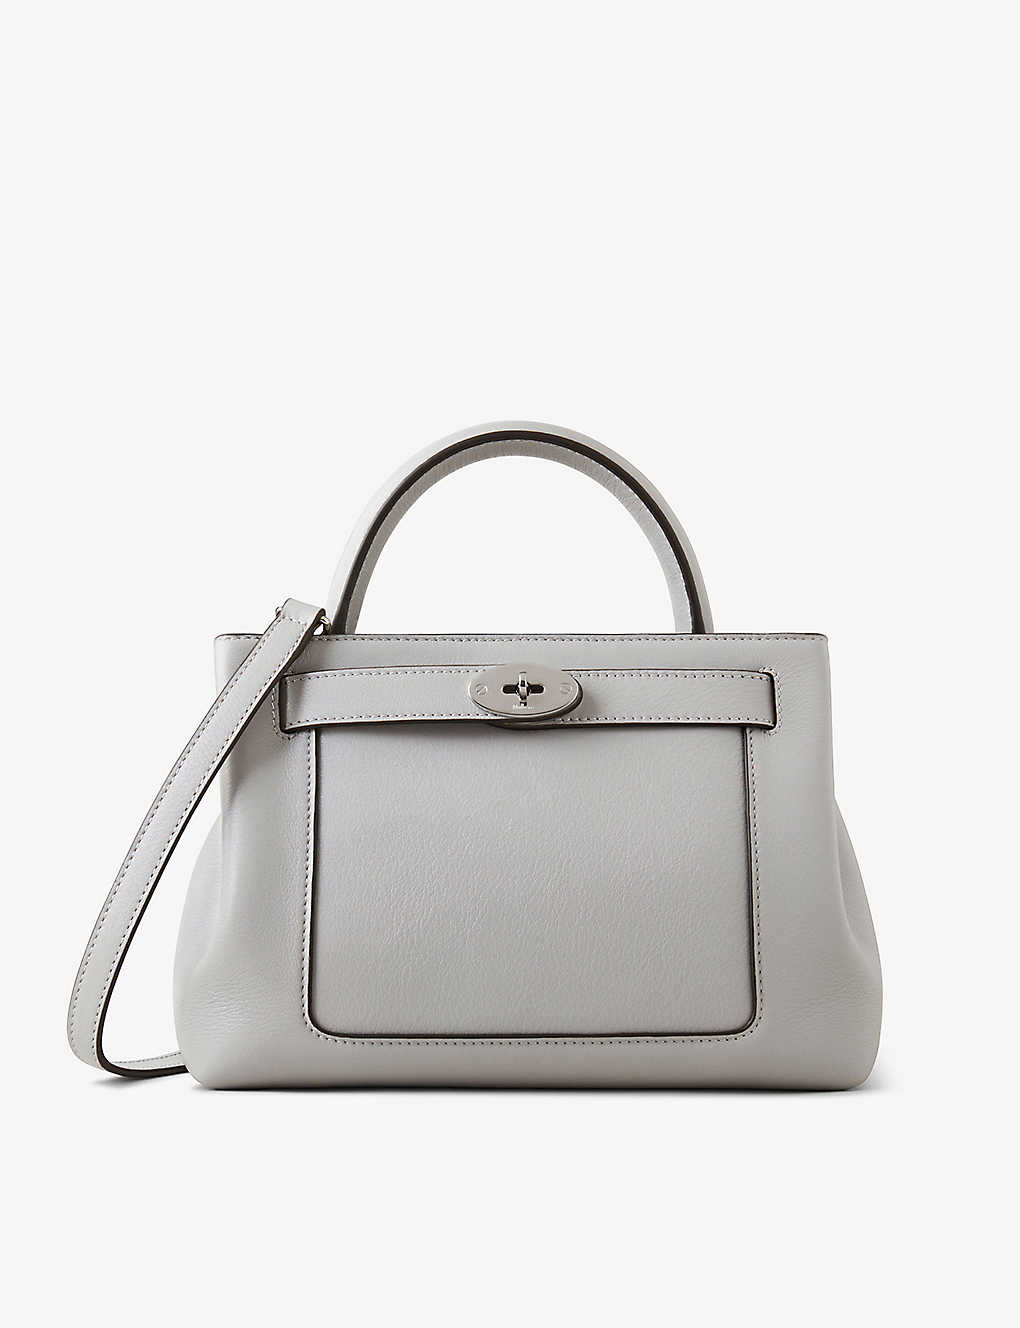 MULBERRY MULBERRY PALE GREY ISLINGTON SMALL LEATHER SHOULDER BAG,67627814